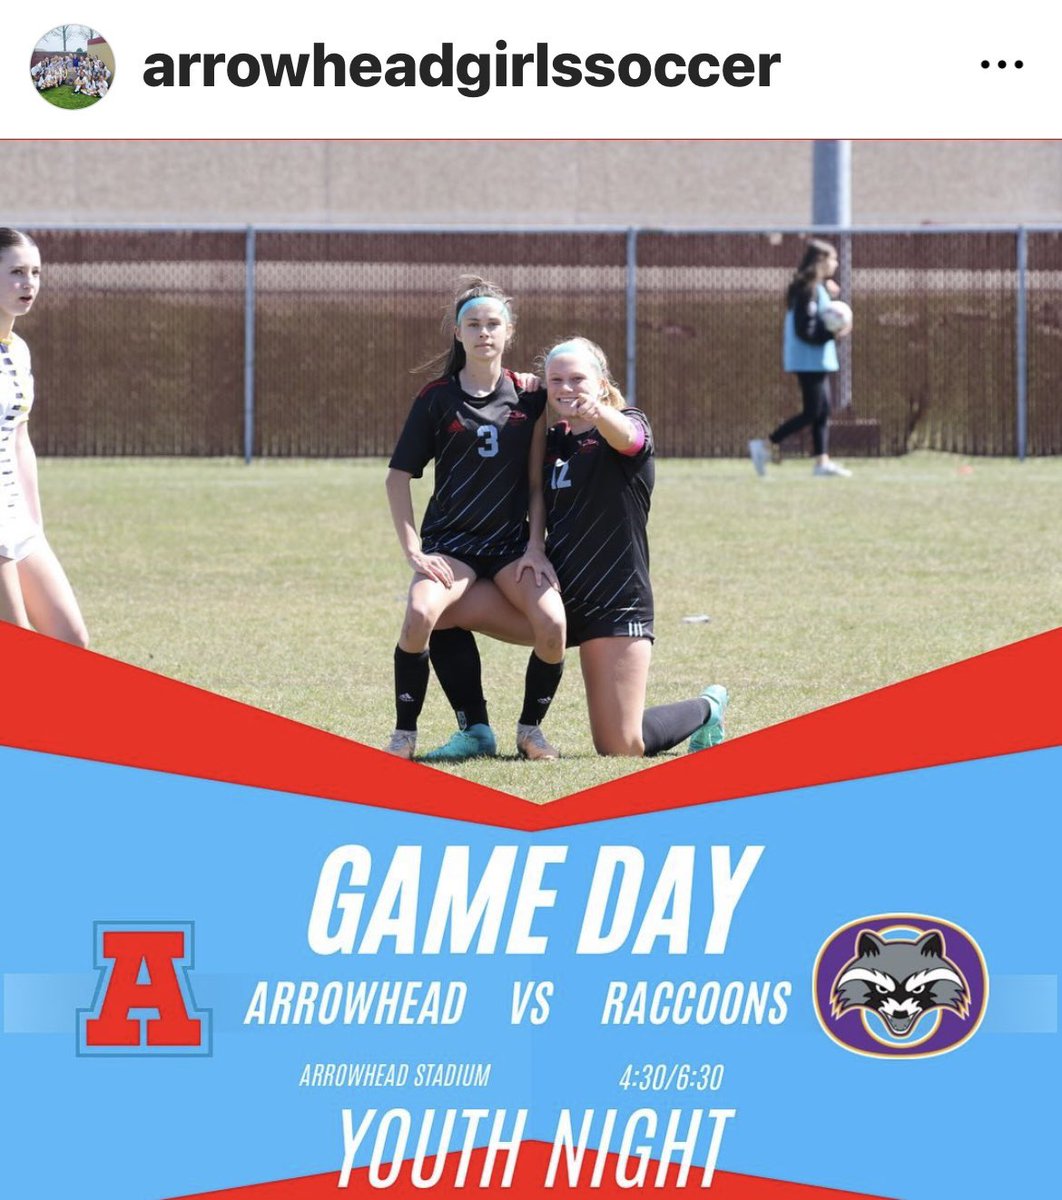 GAME DAY!!! ⚽️ 

🆚 Oconomowoc
🗓️ Today | May 7th
⏰ 6:30pm
📍 Arrowhead HS

@AHSGsoccer @PrepSoccer @ImYouthSoccer @ImCollegeSoccer @WisconsinSoccer @wiaawi @wissportsnet @MaxPreps